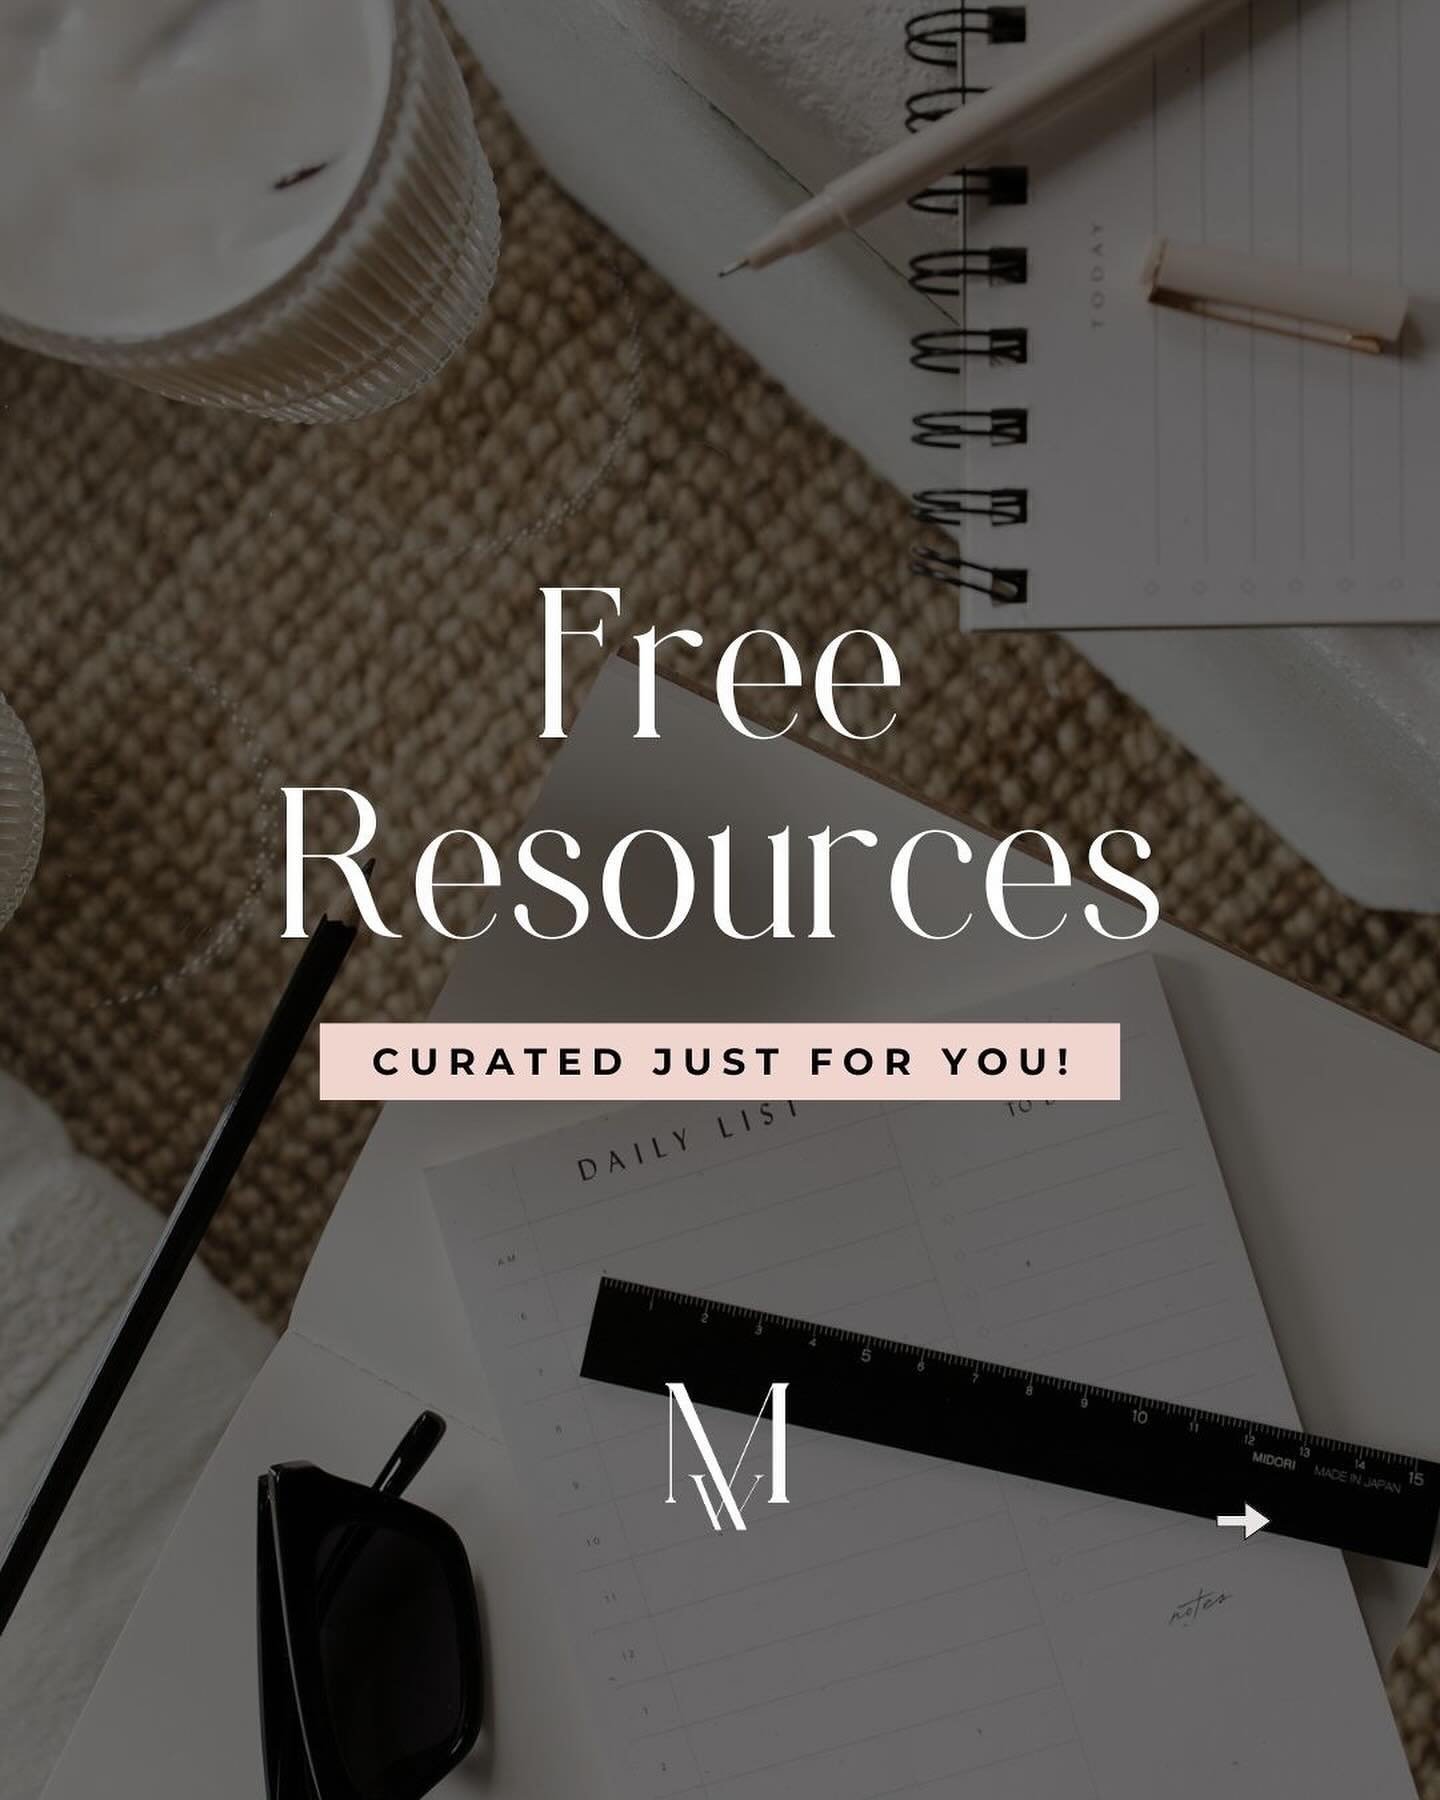 Comment &ldquo;FREE&rdquo; below to snag all the juicy links! 💸👇🏽
⠀⠀⠀⠀⠀⠀⠀⠀⠀
Unlock your path to financial empowerment with these FREE resources! 🌟&nbsp;
⠀⠀⠀⠀⠀⠀⠀⠀⠀
1️⃣ Monthly Money Mindfulness Calendar: Elevate your money mindset and shift your m